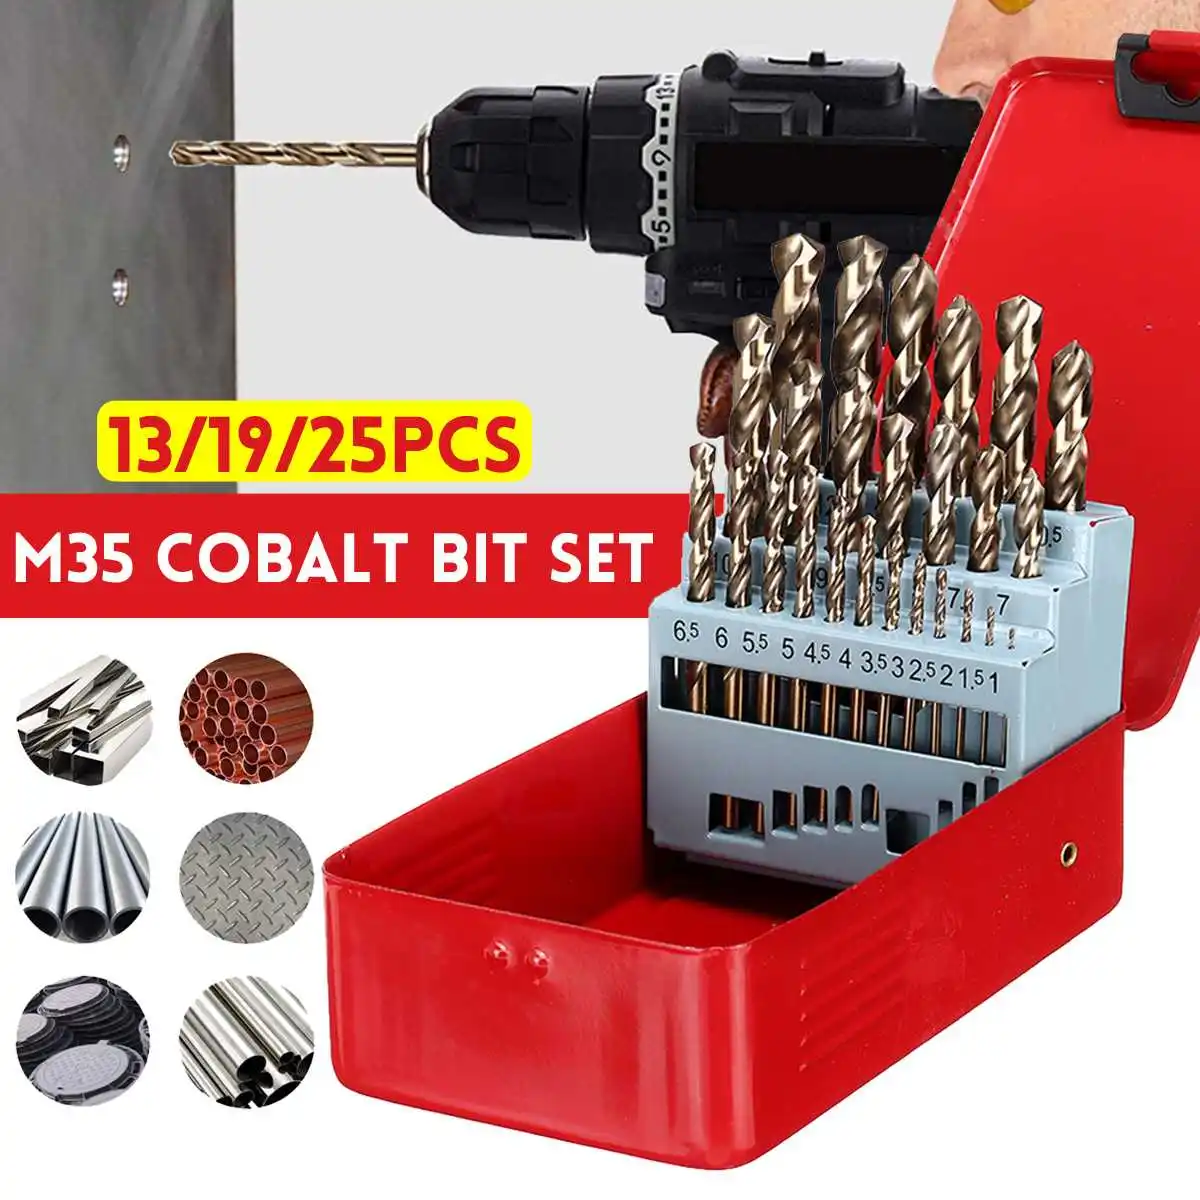 

13/19/25 Pcs M35 Cobalt Drill Bit Set HSS-Co Jobber Length Twist Drill Bits With Metal Case For Stainless Steel Wood